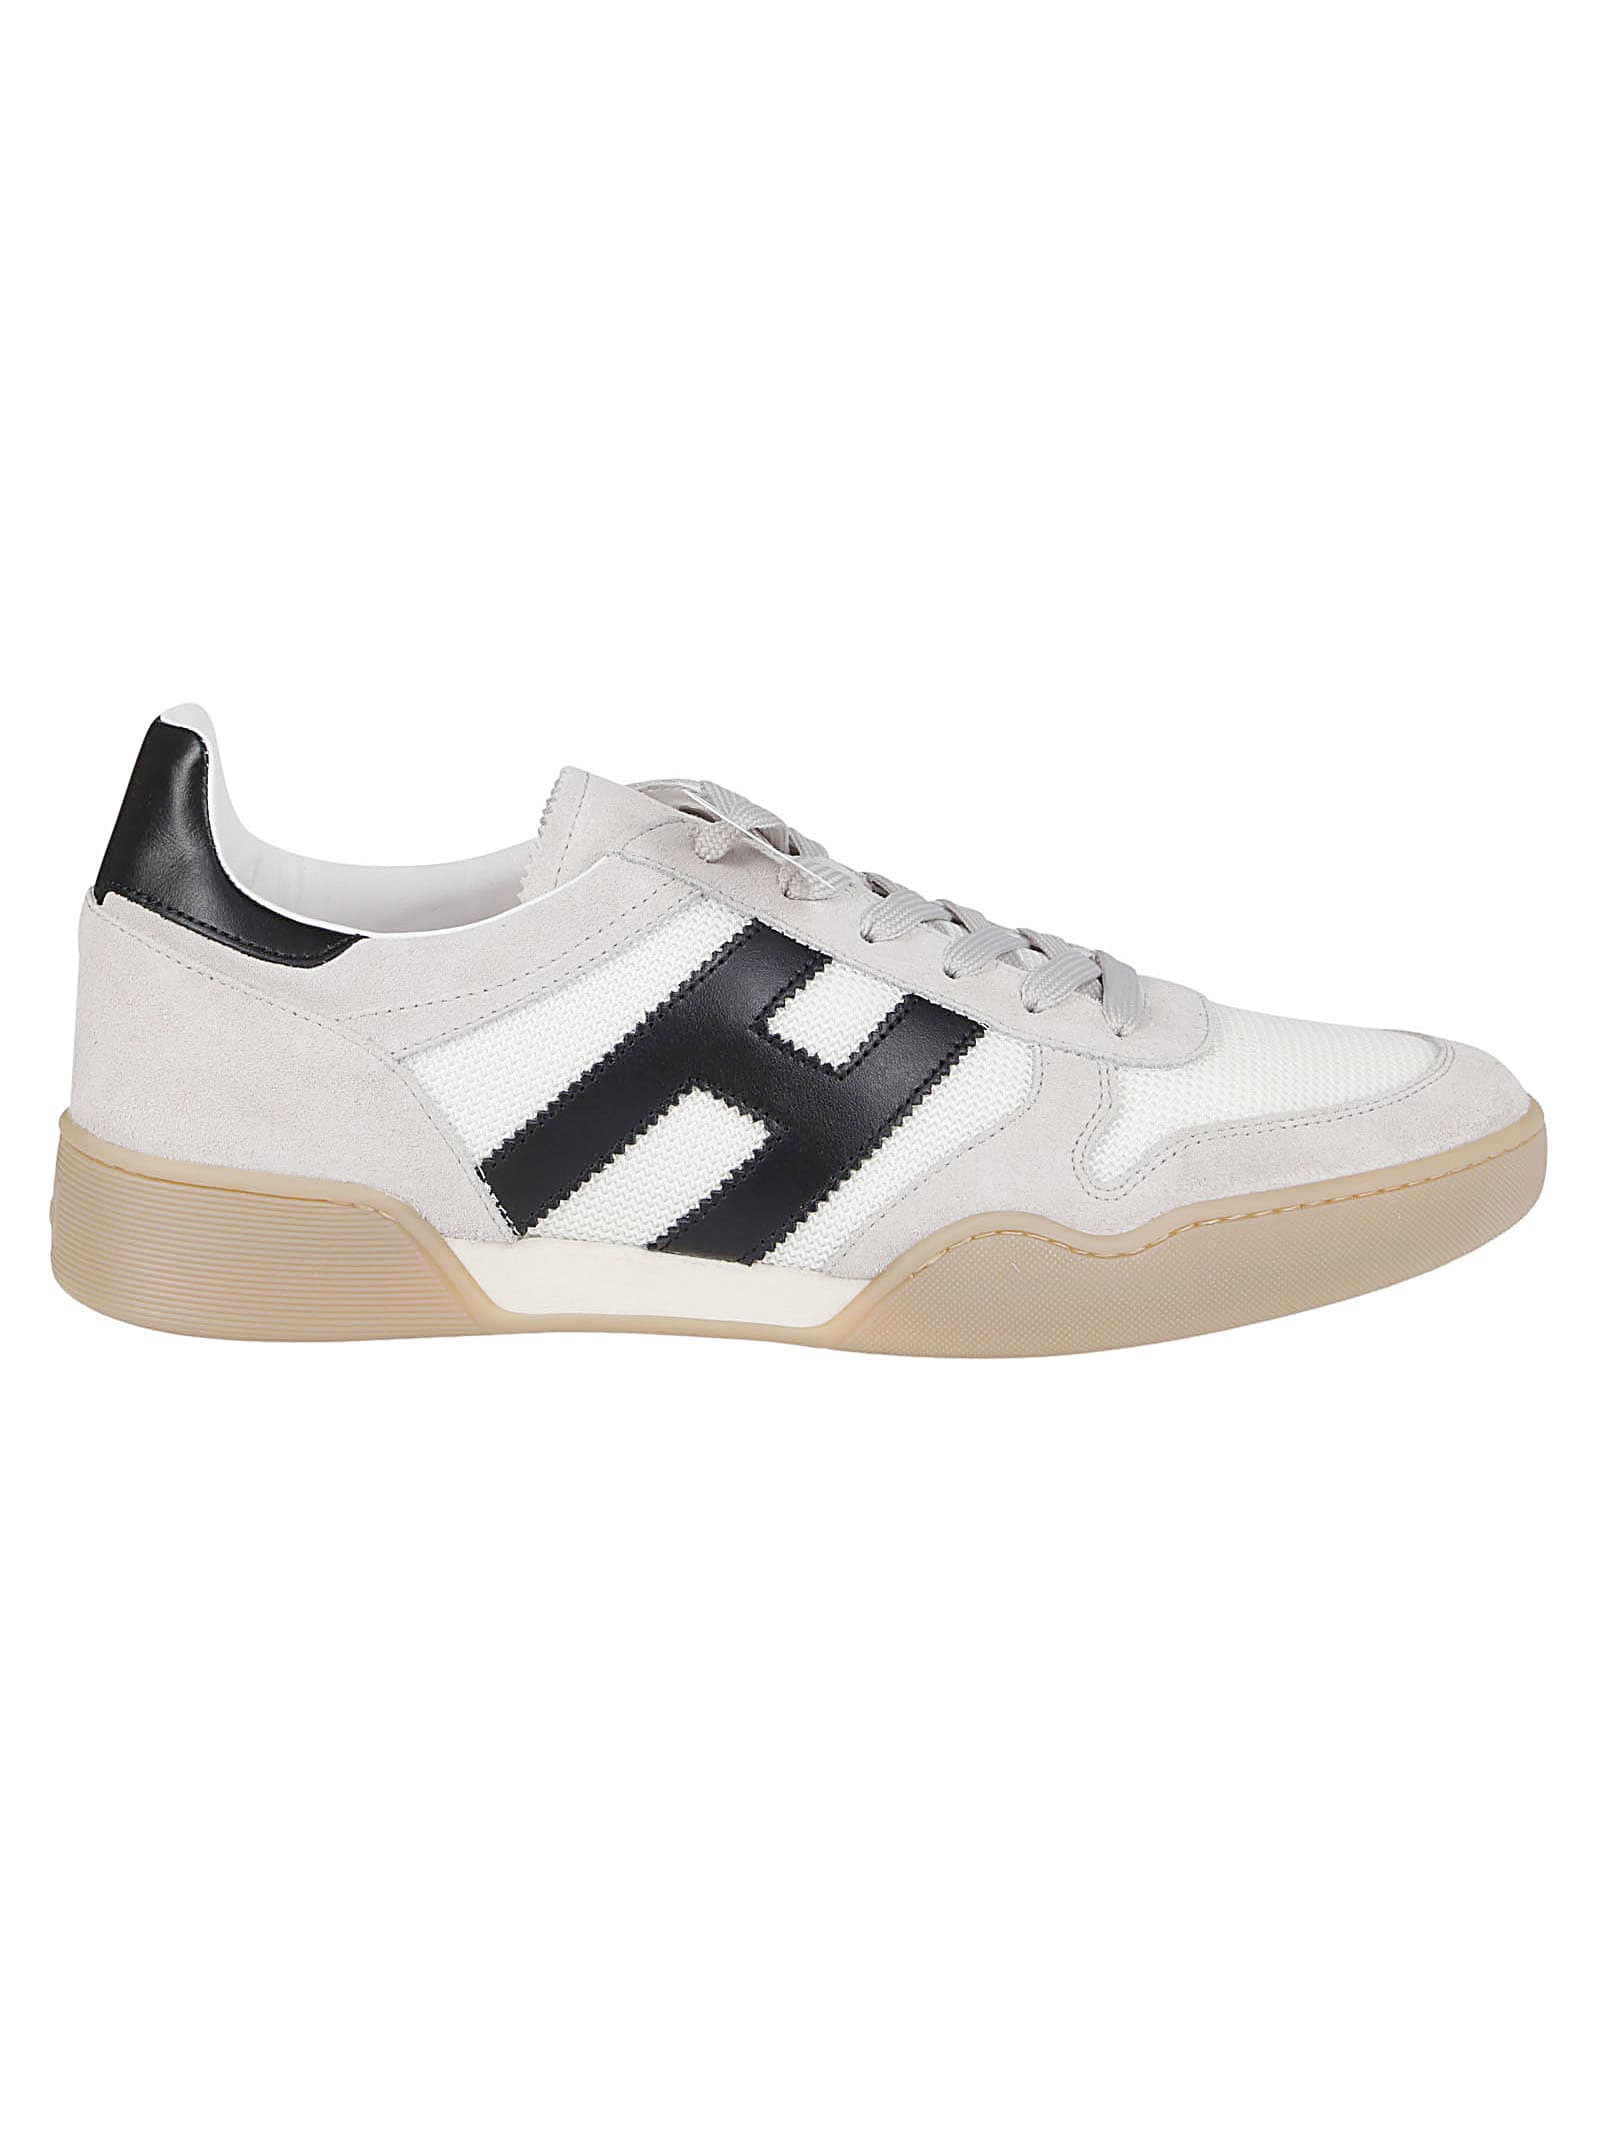 Hogan White Leather And Suede H357 Sneakers